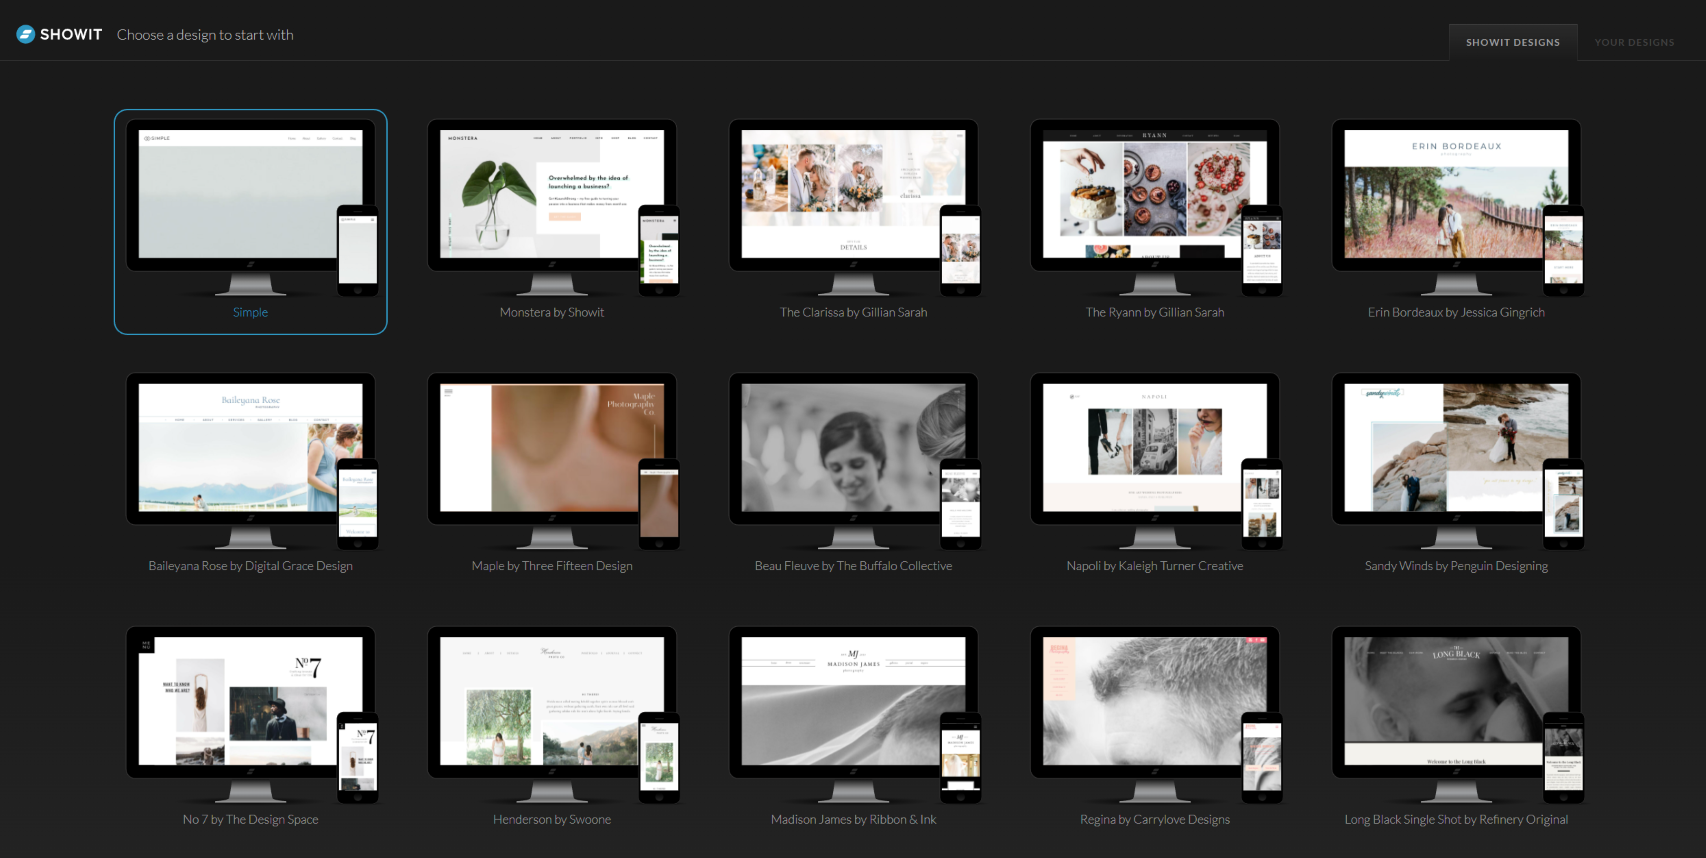 Free Themes for Showit Websites